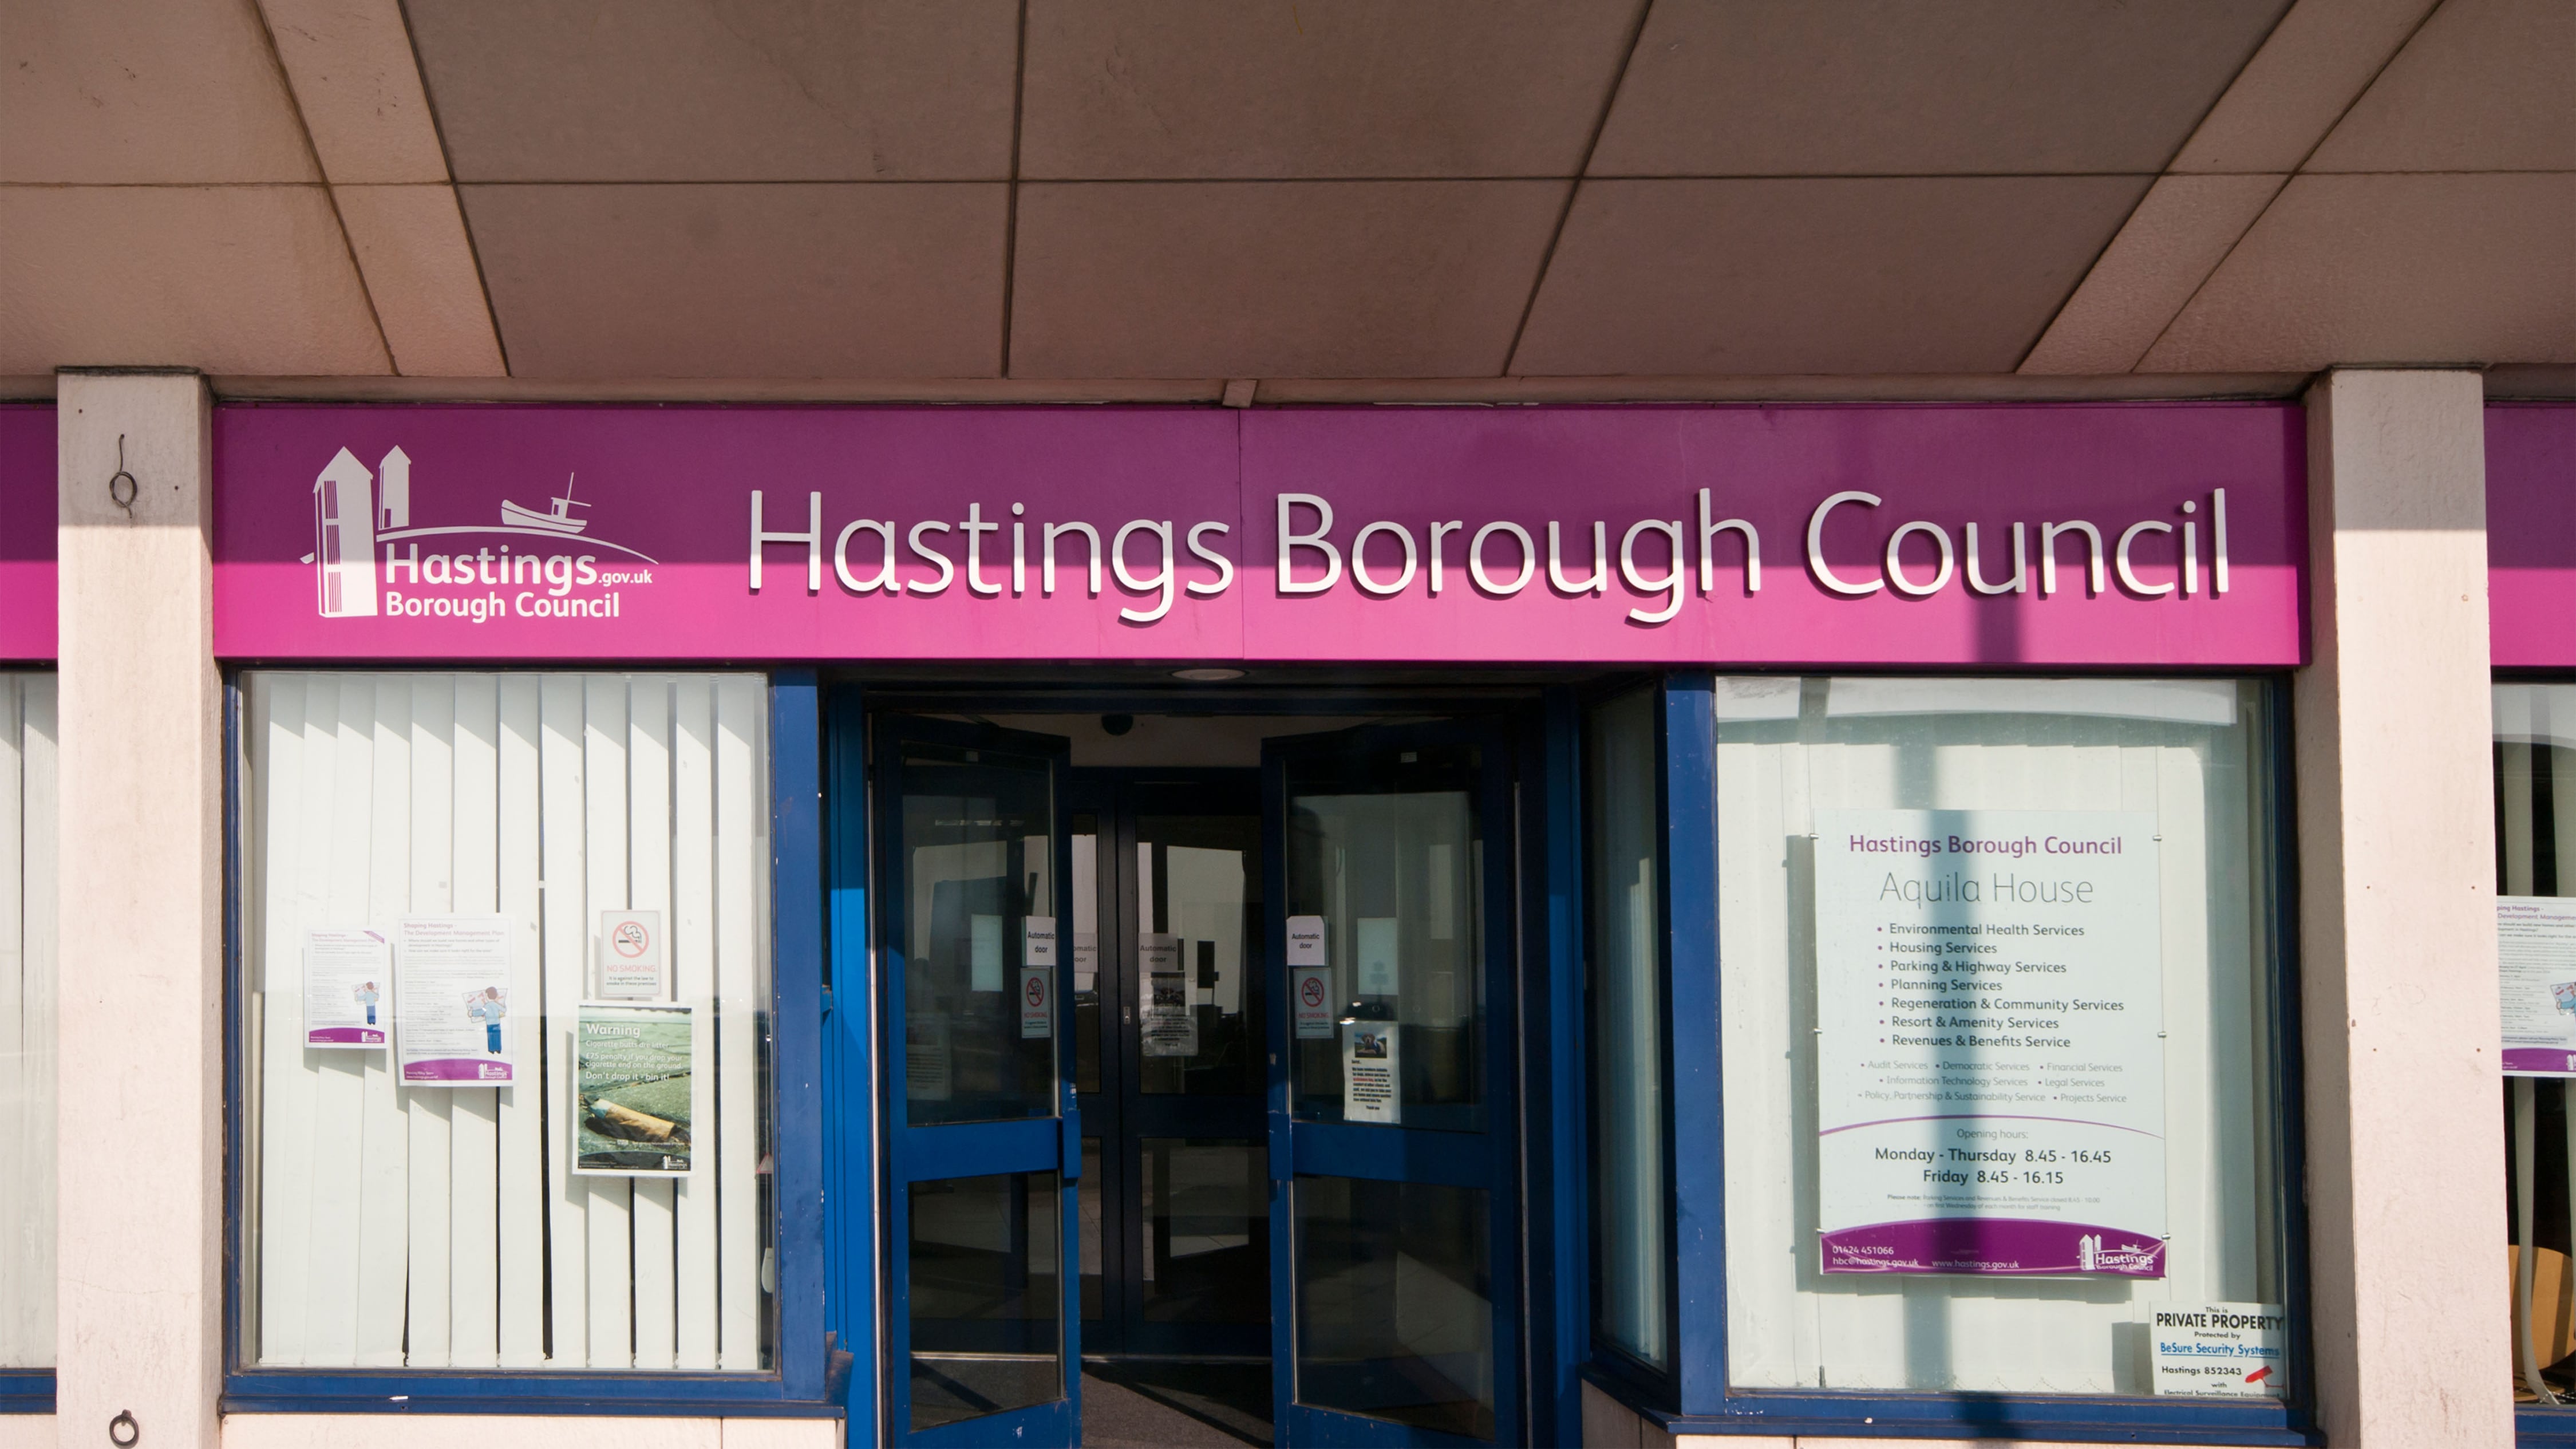 Hastings Borough Council’s full council meeting on Wednesday evening was halted after less than two minutes